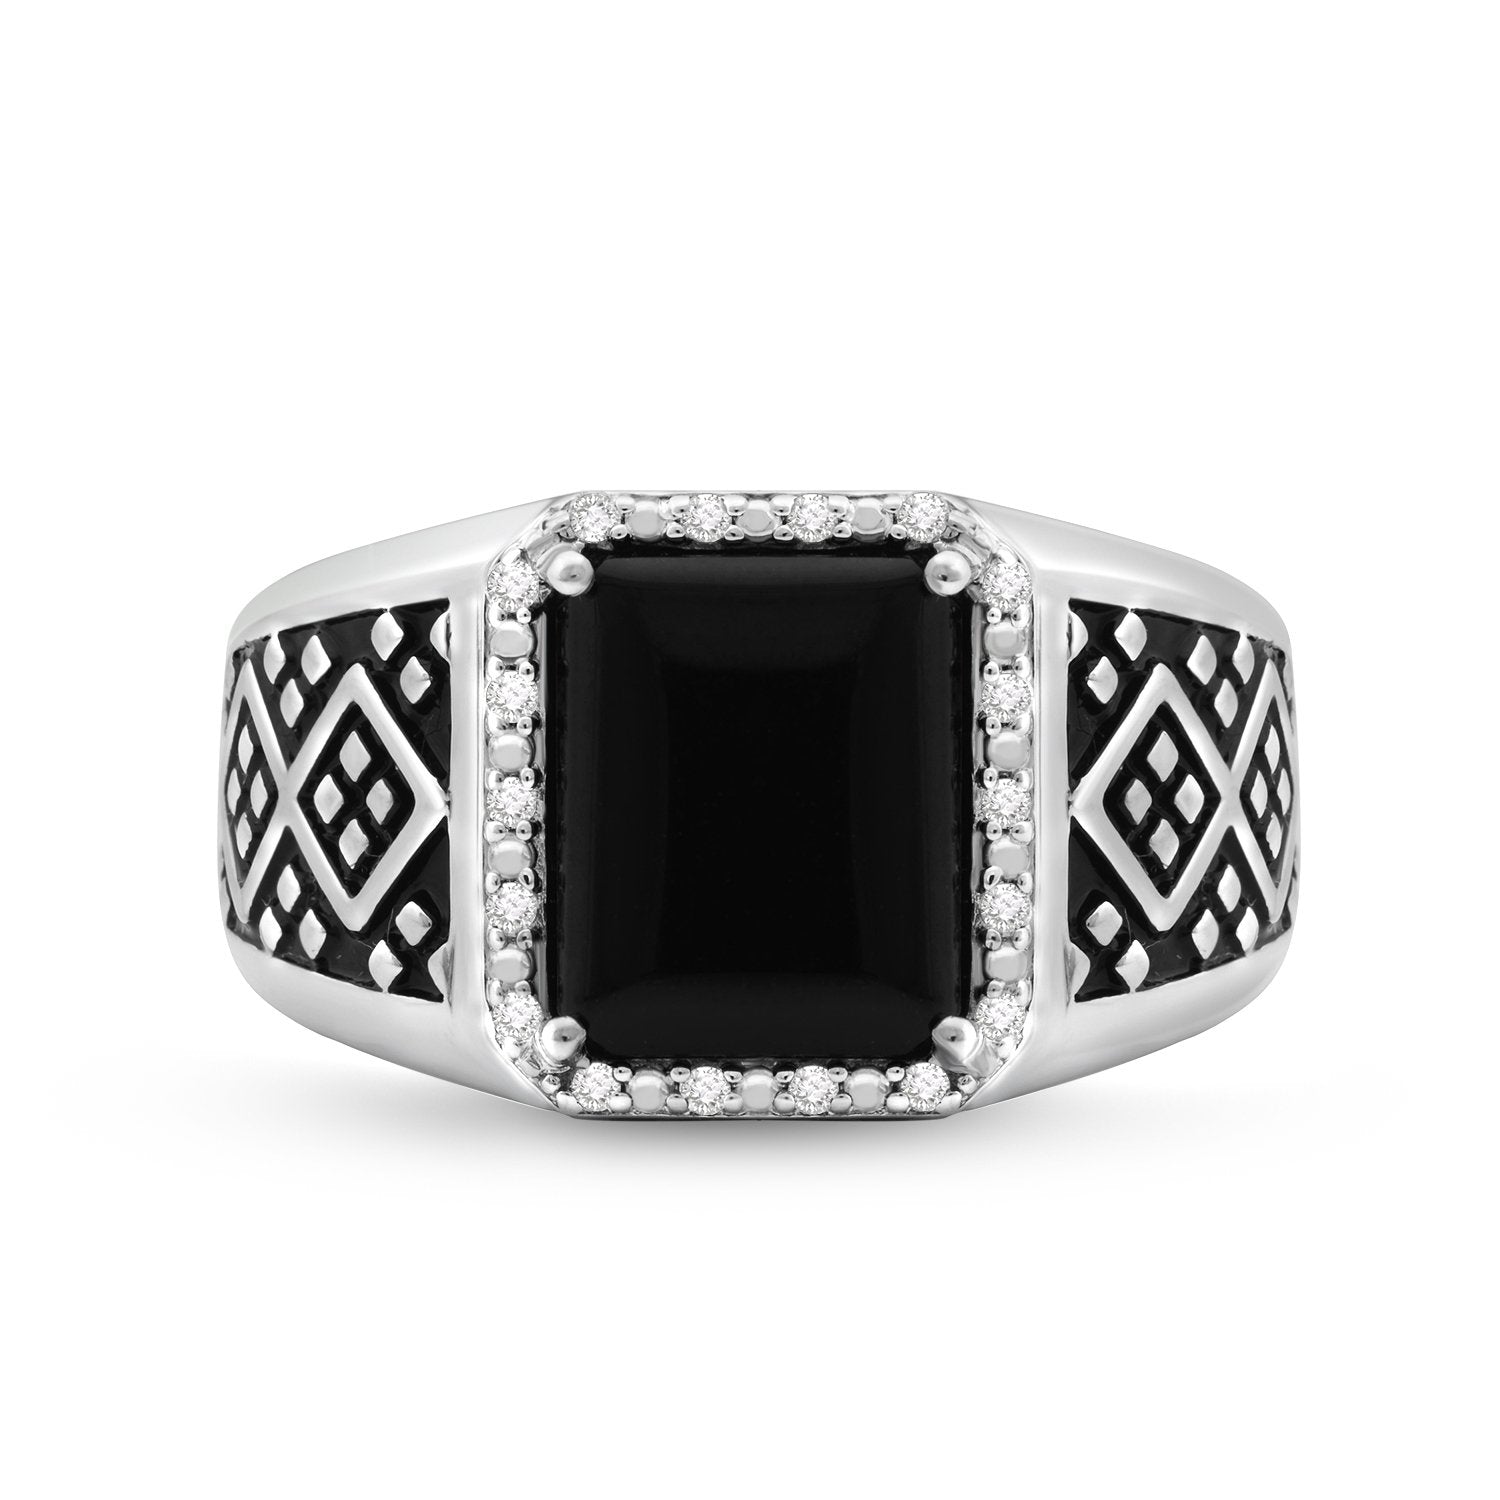 Signet Rings for Men, Pinky Thumb Ring Mens Black Onyx Stone Band Stainless  Steel Square Agate Jewelry Gift for Him, Cuban Link Chain Cool Biker Finger  Ring for Boys|Amazon.com